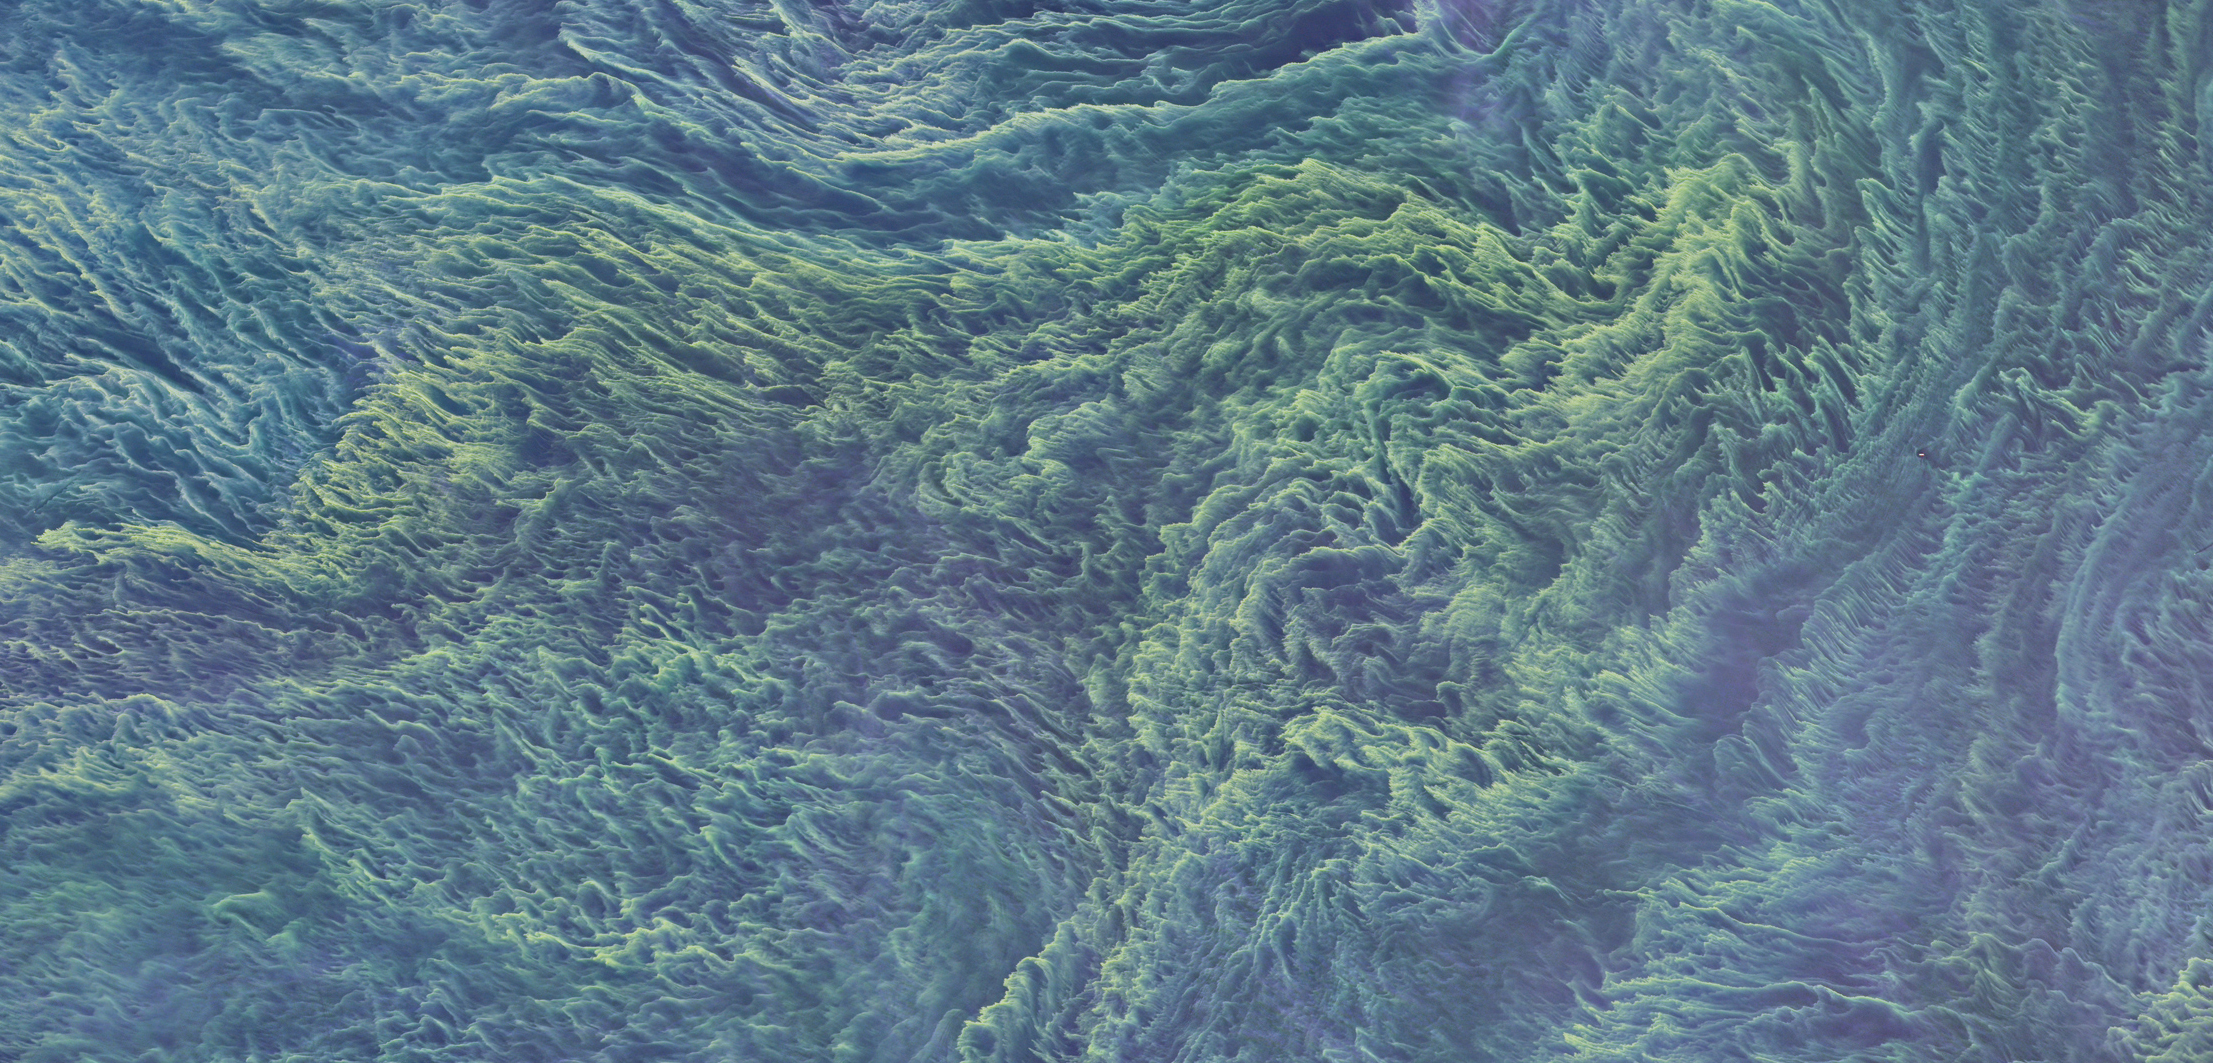 A false-color satellite image of a massive cyanobacteria bloom in the Baltic Sea, as seen by NASA’s Landsat 8. Photo by NASA/Earth Observatory